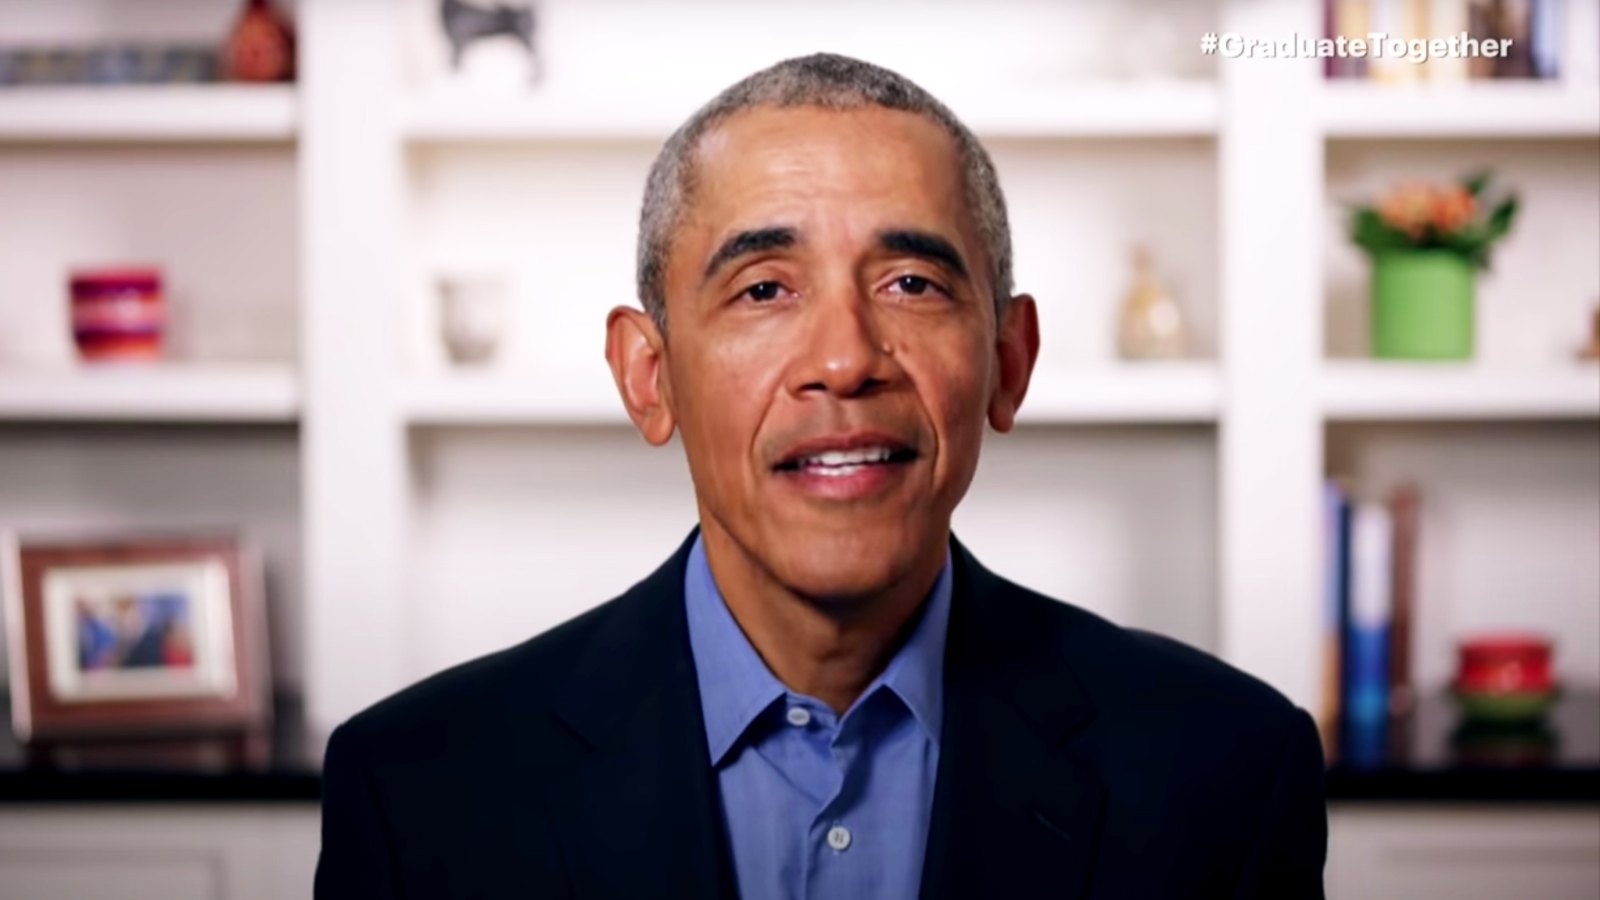 Barack Obama Offers 3 Pieces of Advice to Class of 2020 in ‘Graduate Together’